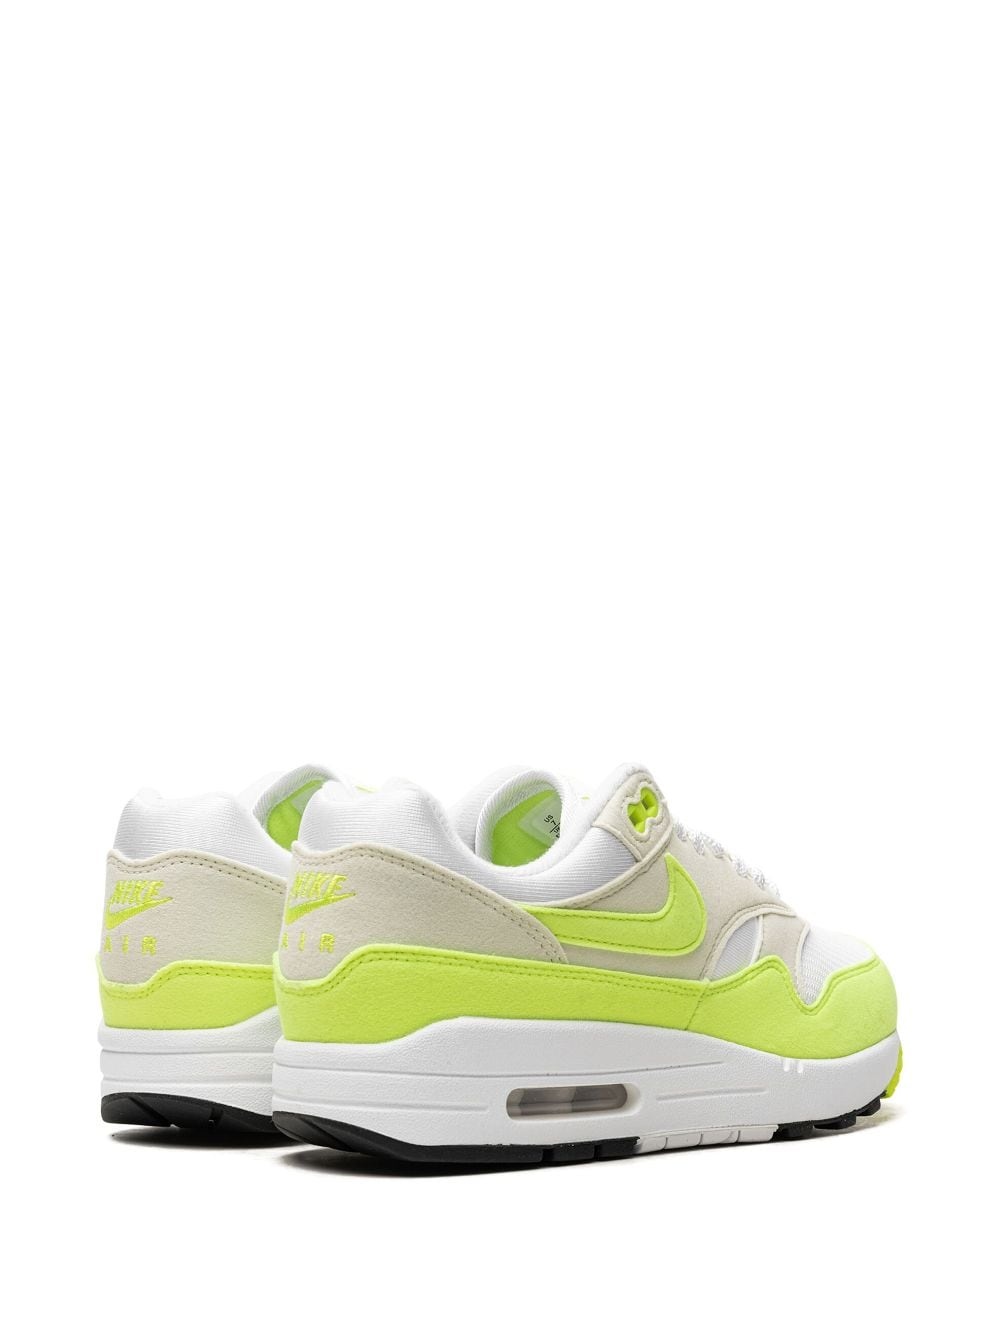 Air Max 1 "Volt Suede" sneakers - 3